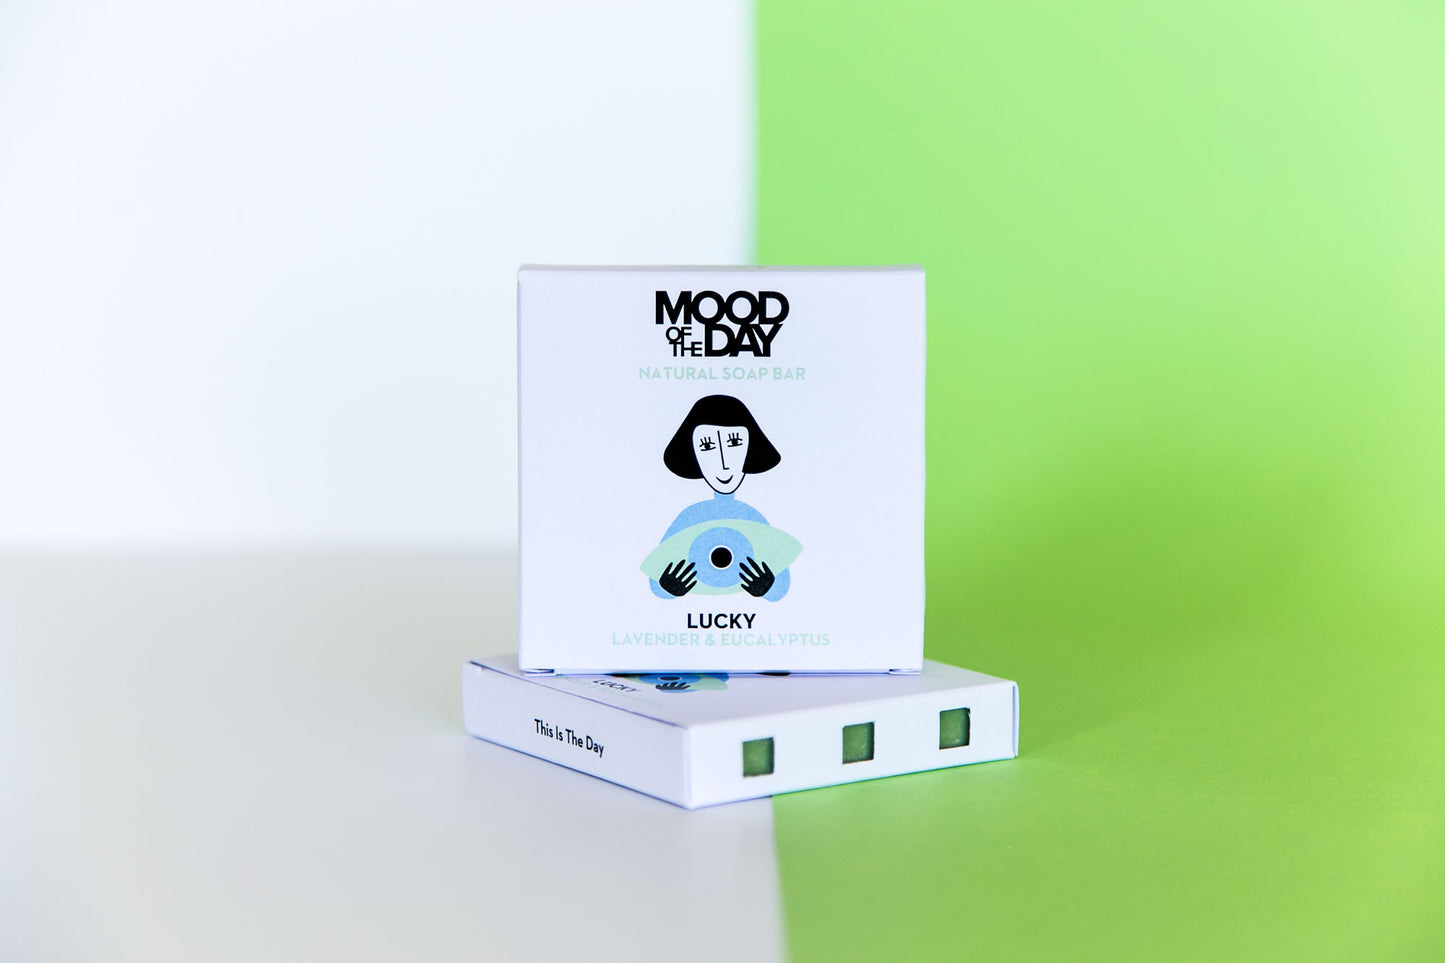 Mood of the Day Soap Bar 60g